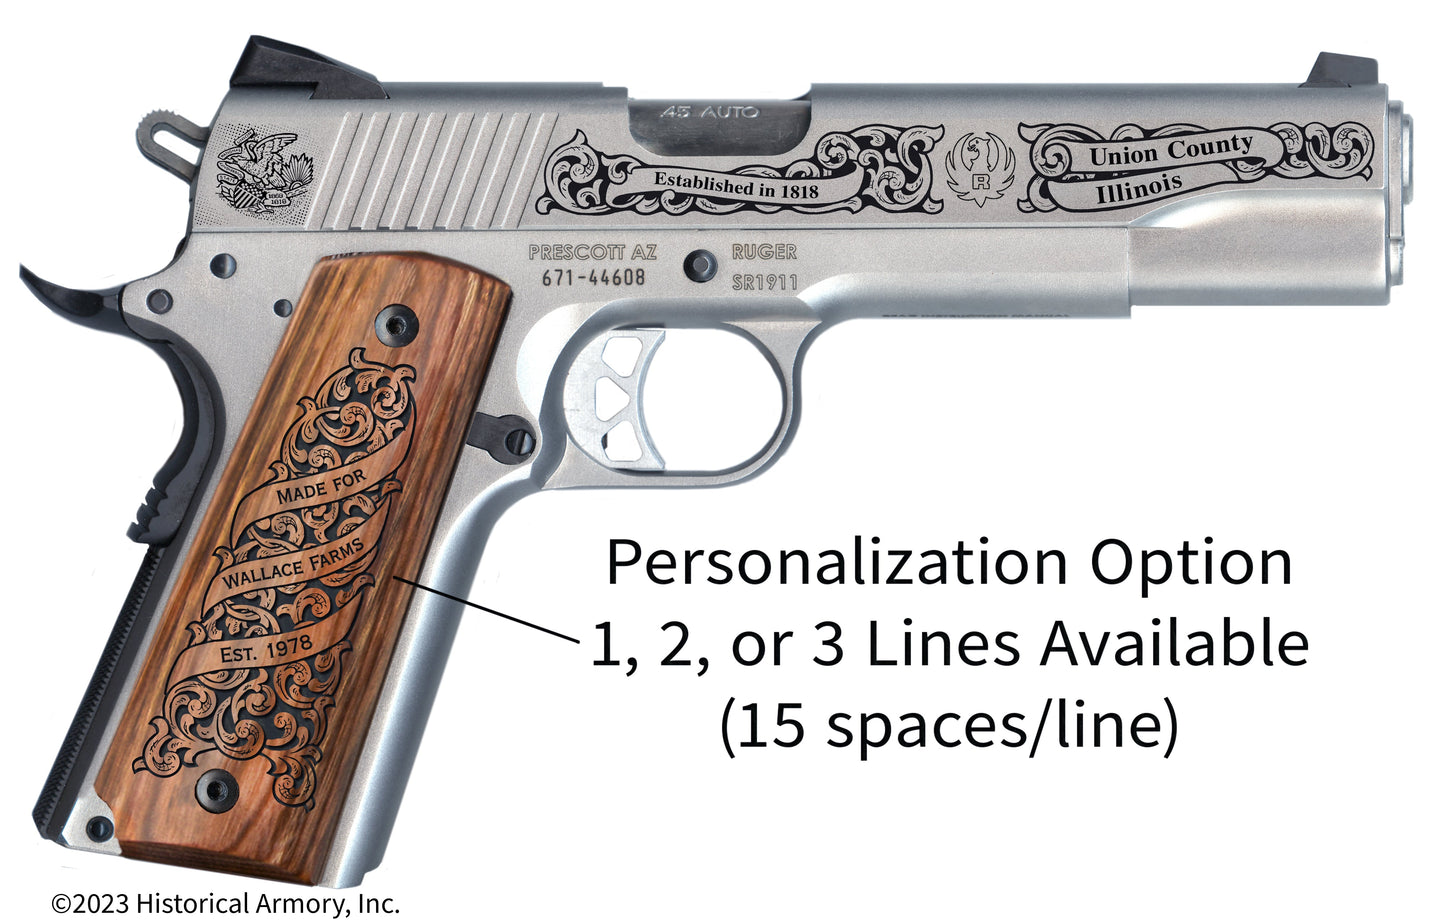 Union County Illinois Personalized Engraved .45 Auto Ruger 1911